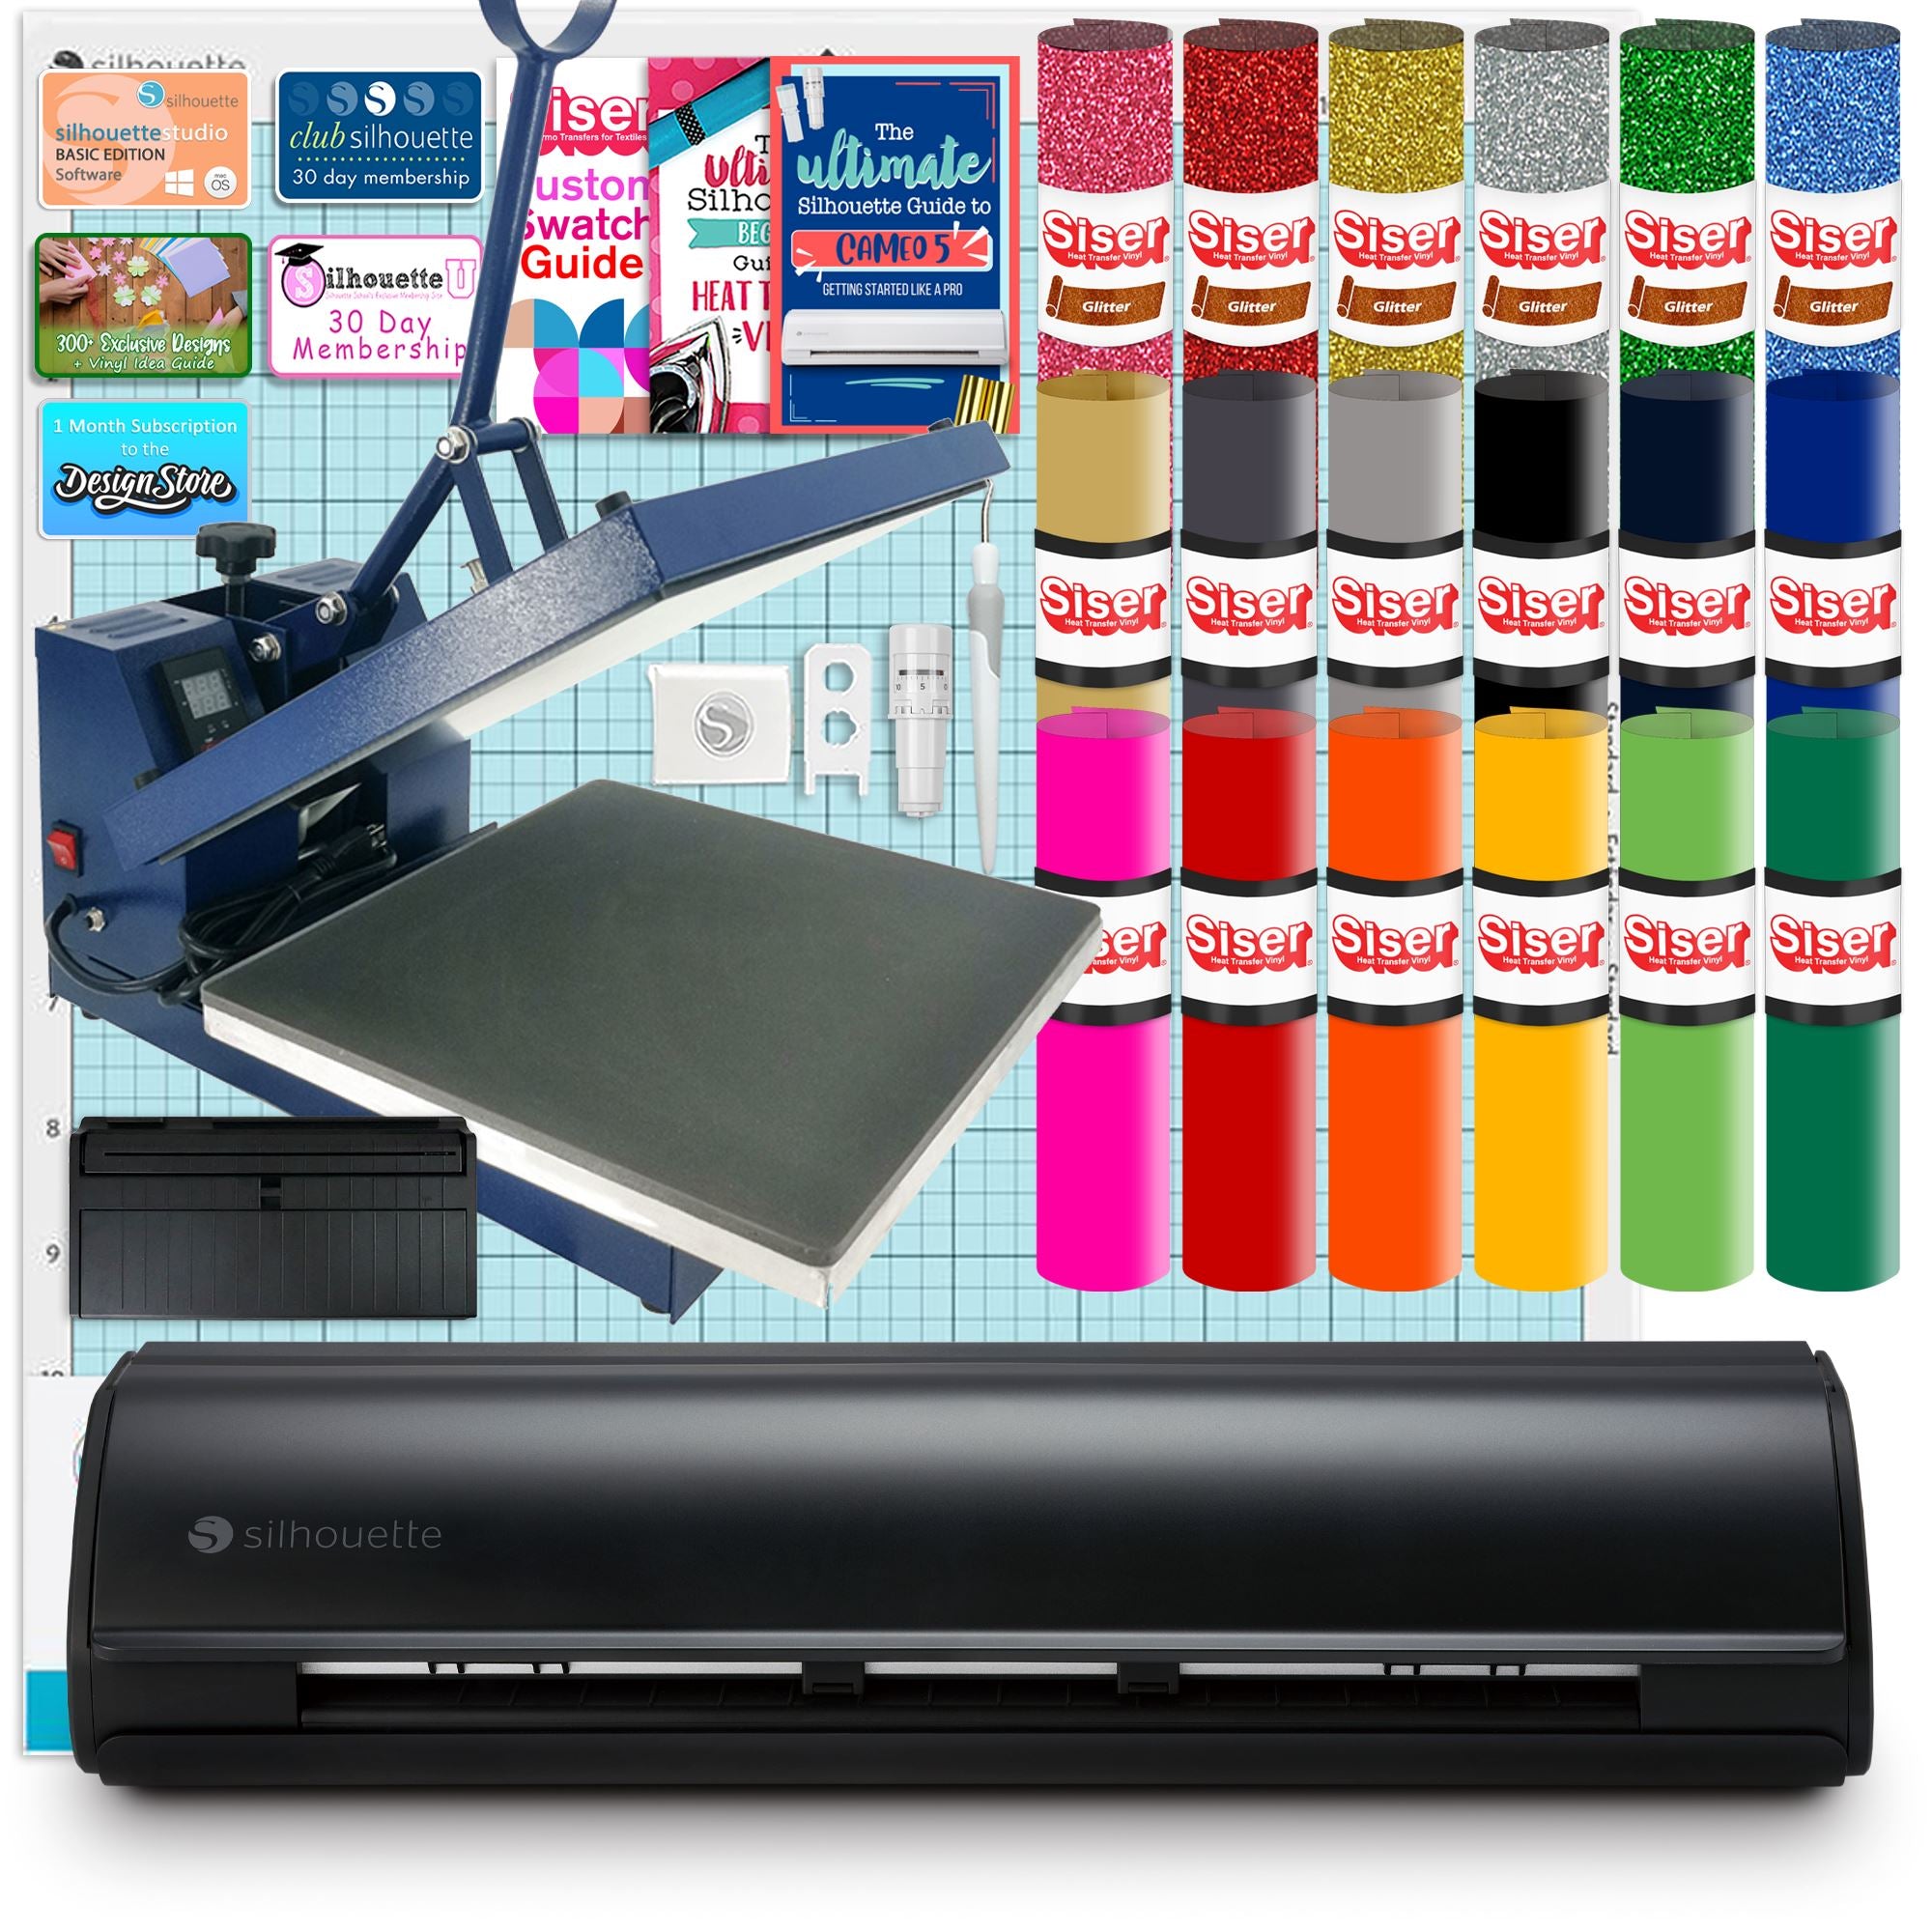 Heat Press Essential Tools  What Supplies Should I Buy With My